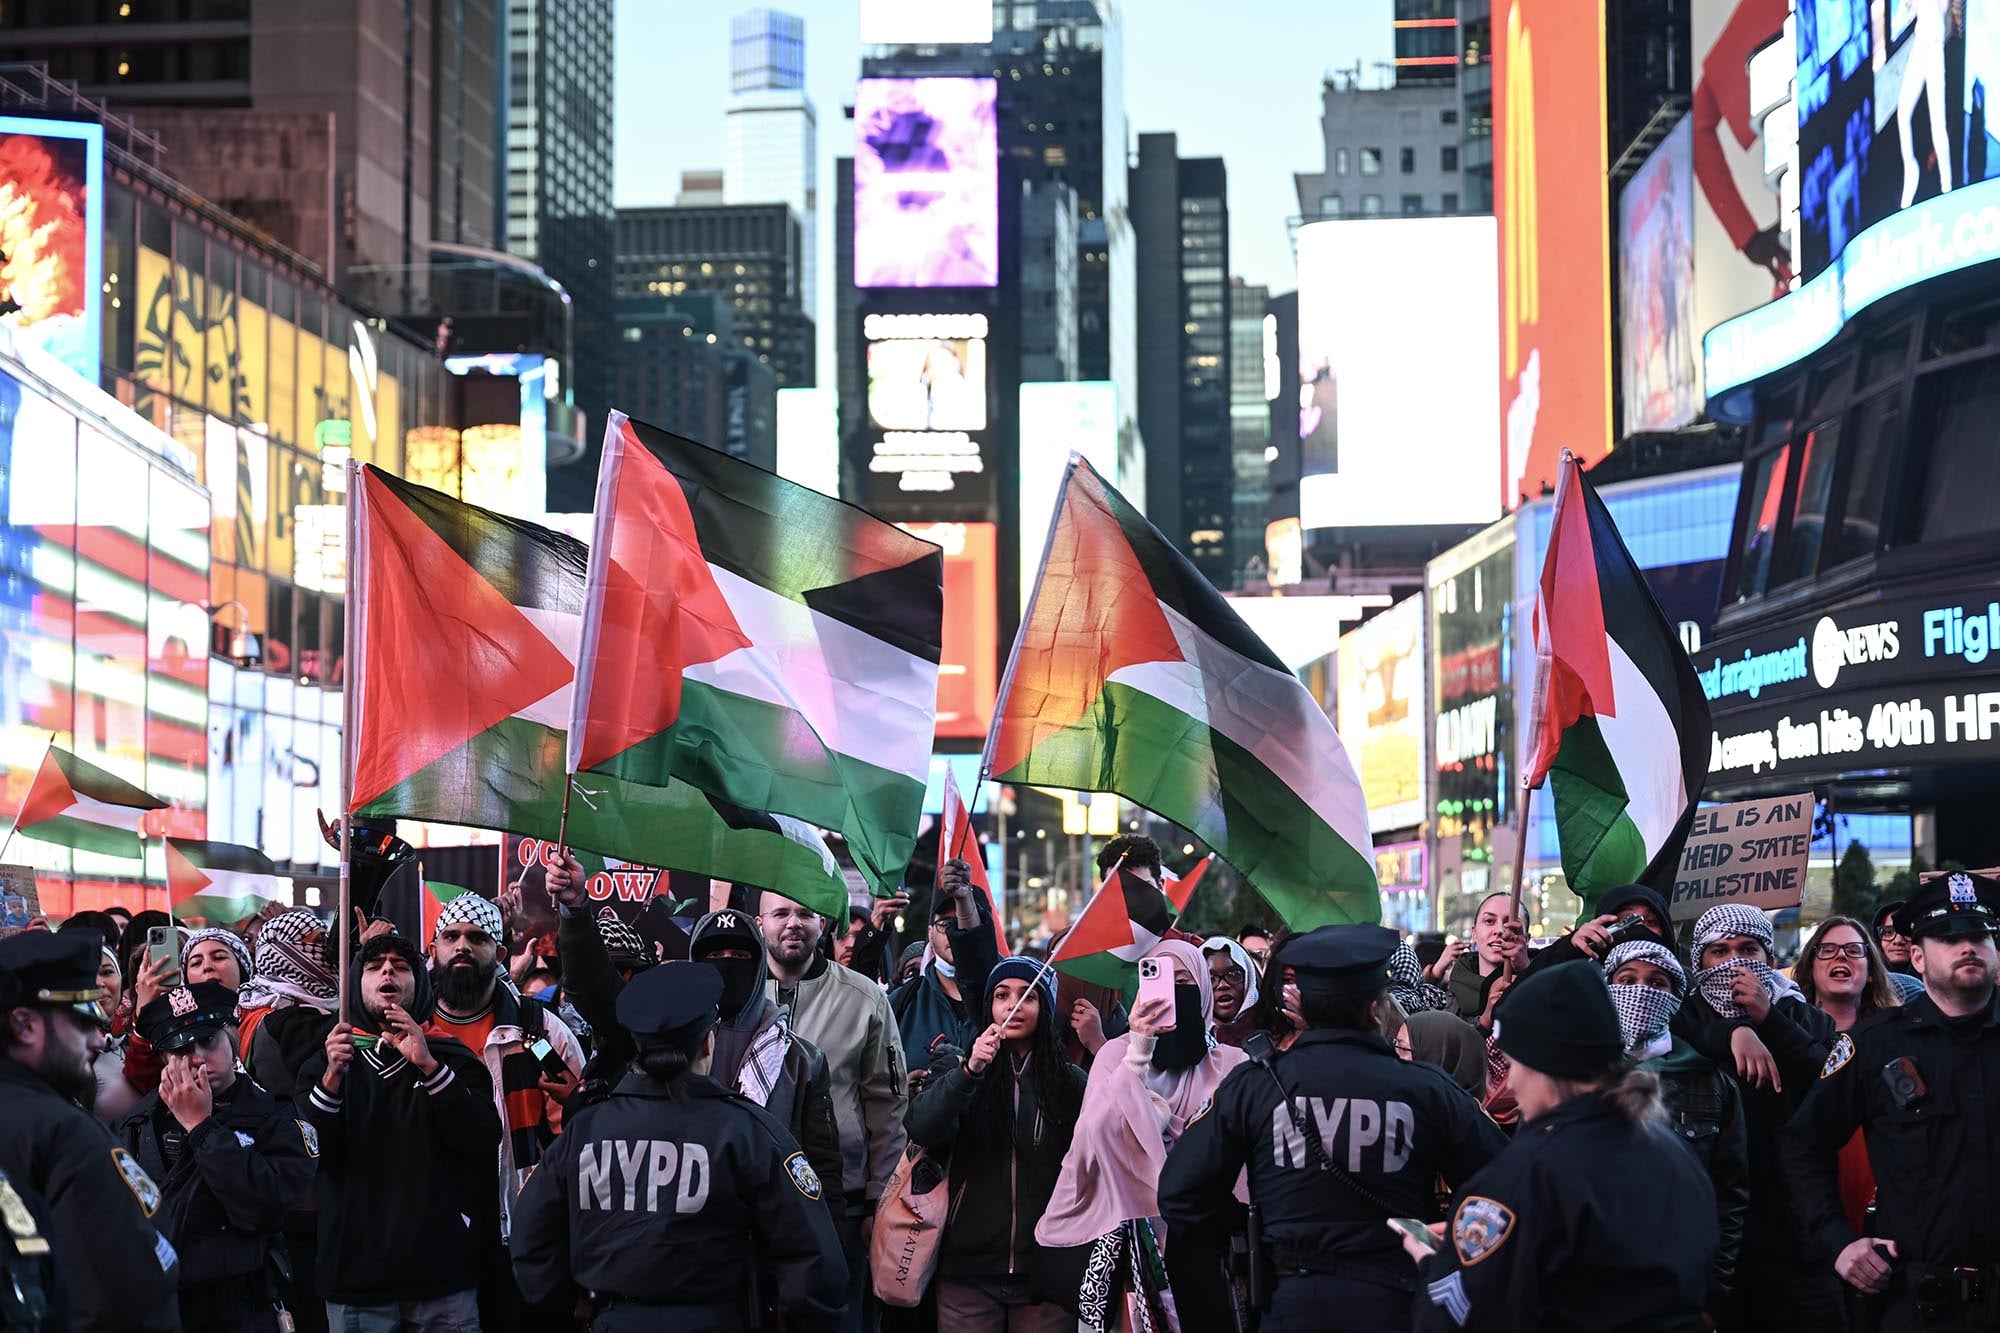 Protestors march with Palestinian flags in New York City.